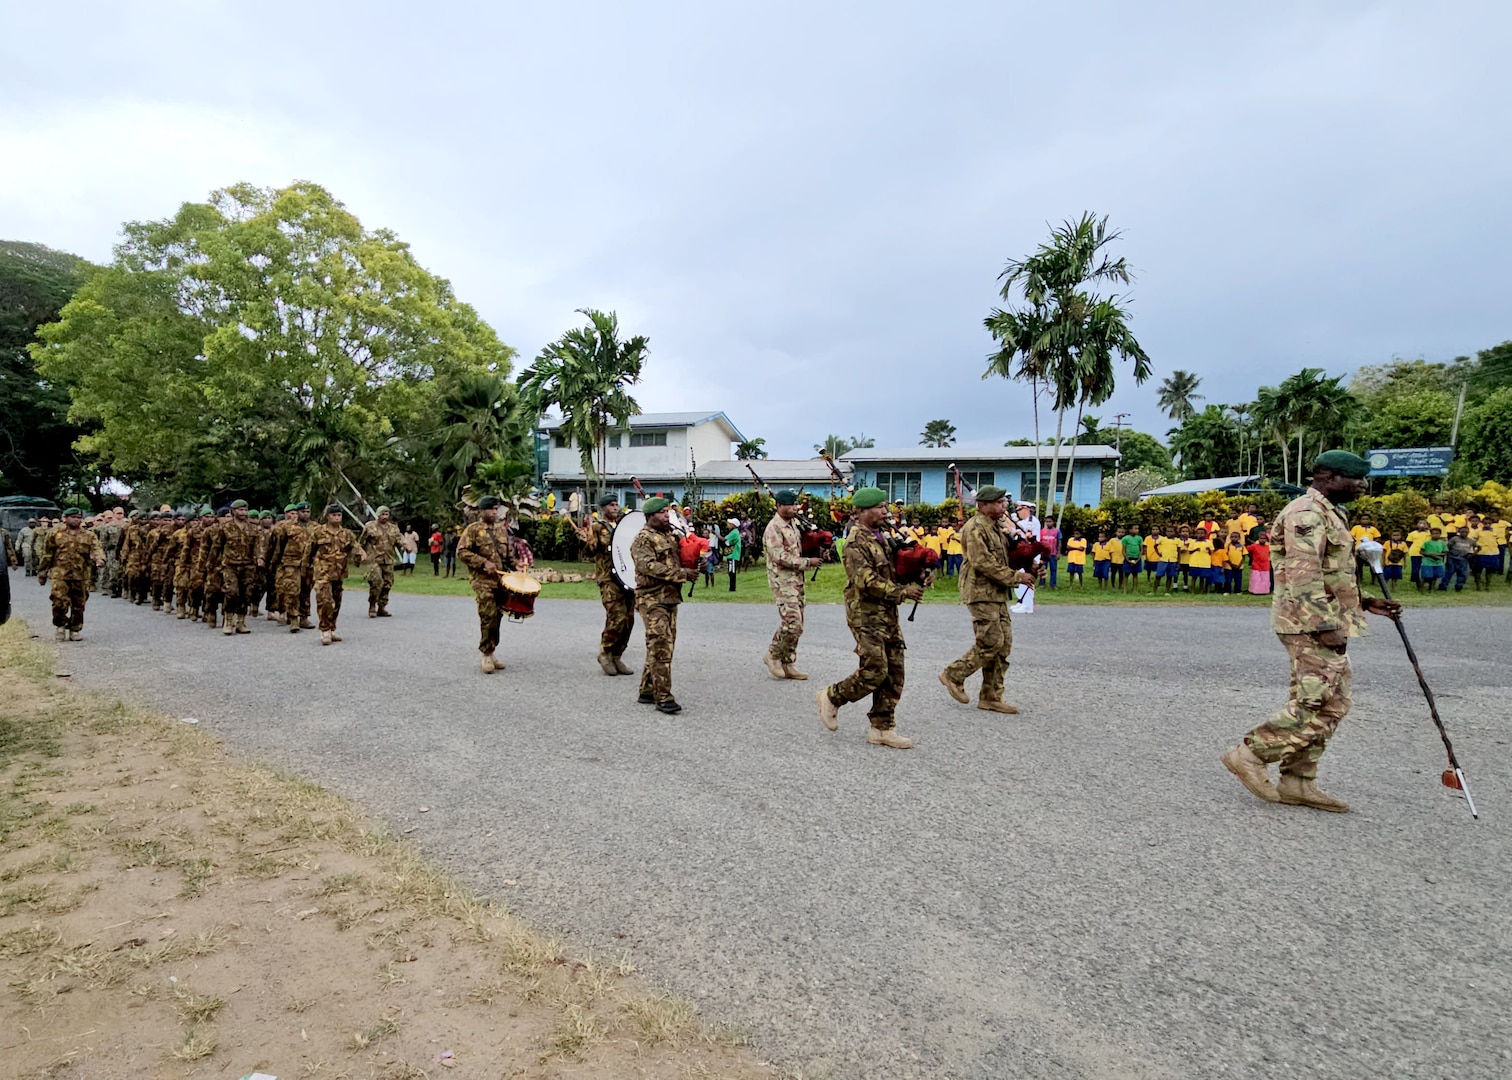 WEWAK, Papua New Guinea (Oct. 20, 2023) – Papua New Guinea Defense Force service members lead a parade through Wewak to the Pacific Partnership 2023 PNG closing ceremony, Oct. 20. Now in its 18th year, Pacific Partnership is the largest annual multinational humanitarian assistance and disaster relief preparedness mission conducted in the Indo-Pacific. (U.S. Navy photo by Chief Mass Communication Specialist Kegan E. Kay)